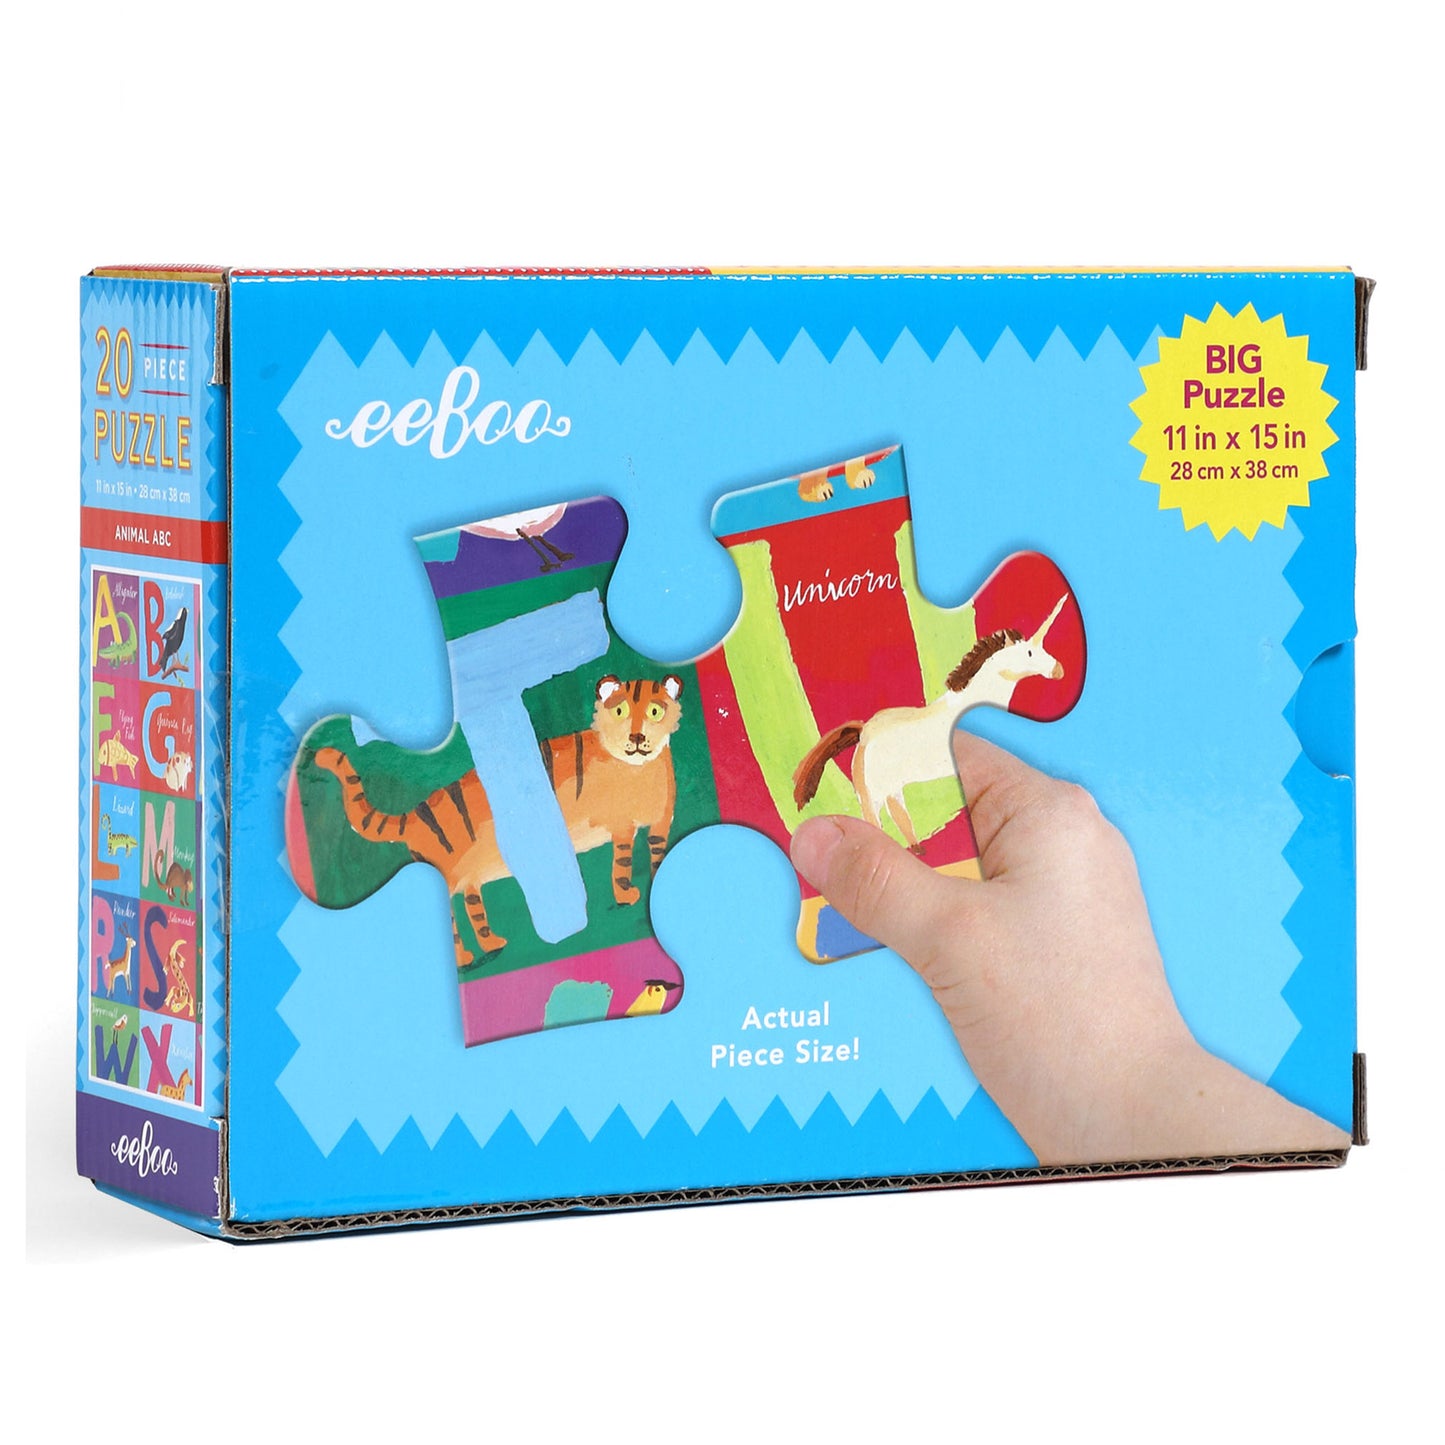 Animal ABC Alphabet 20 Piece Big Puzzle by eeBoo for Kids Ages 3+